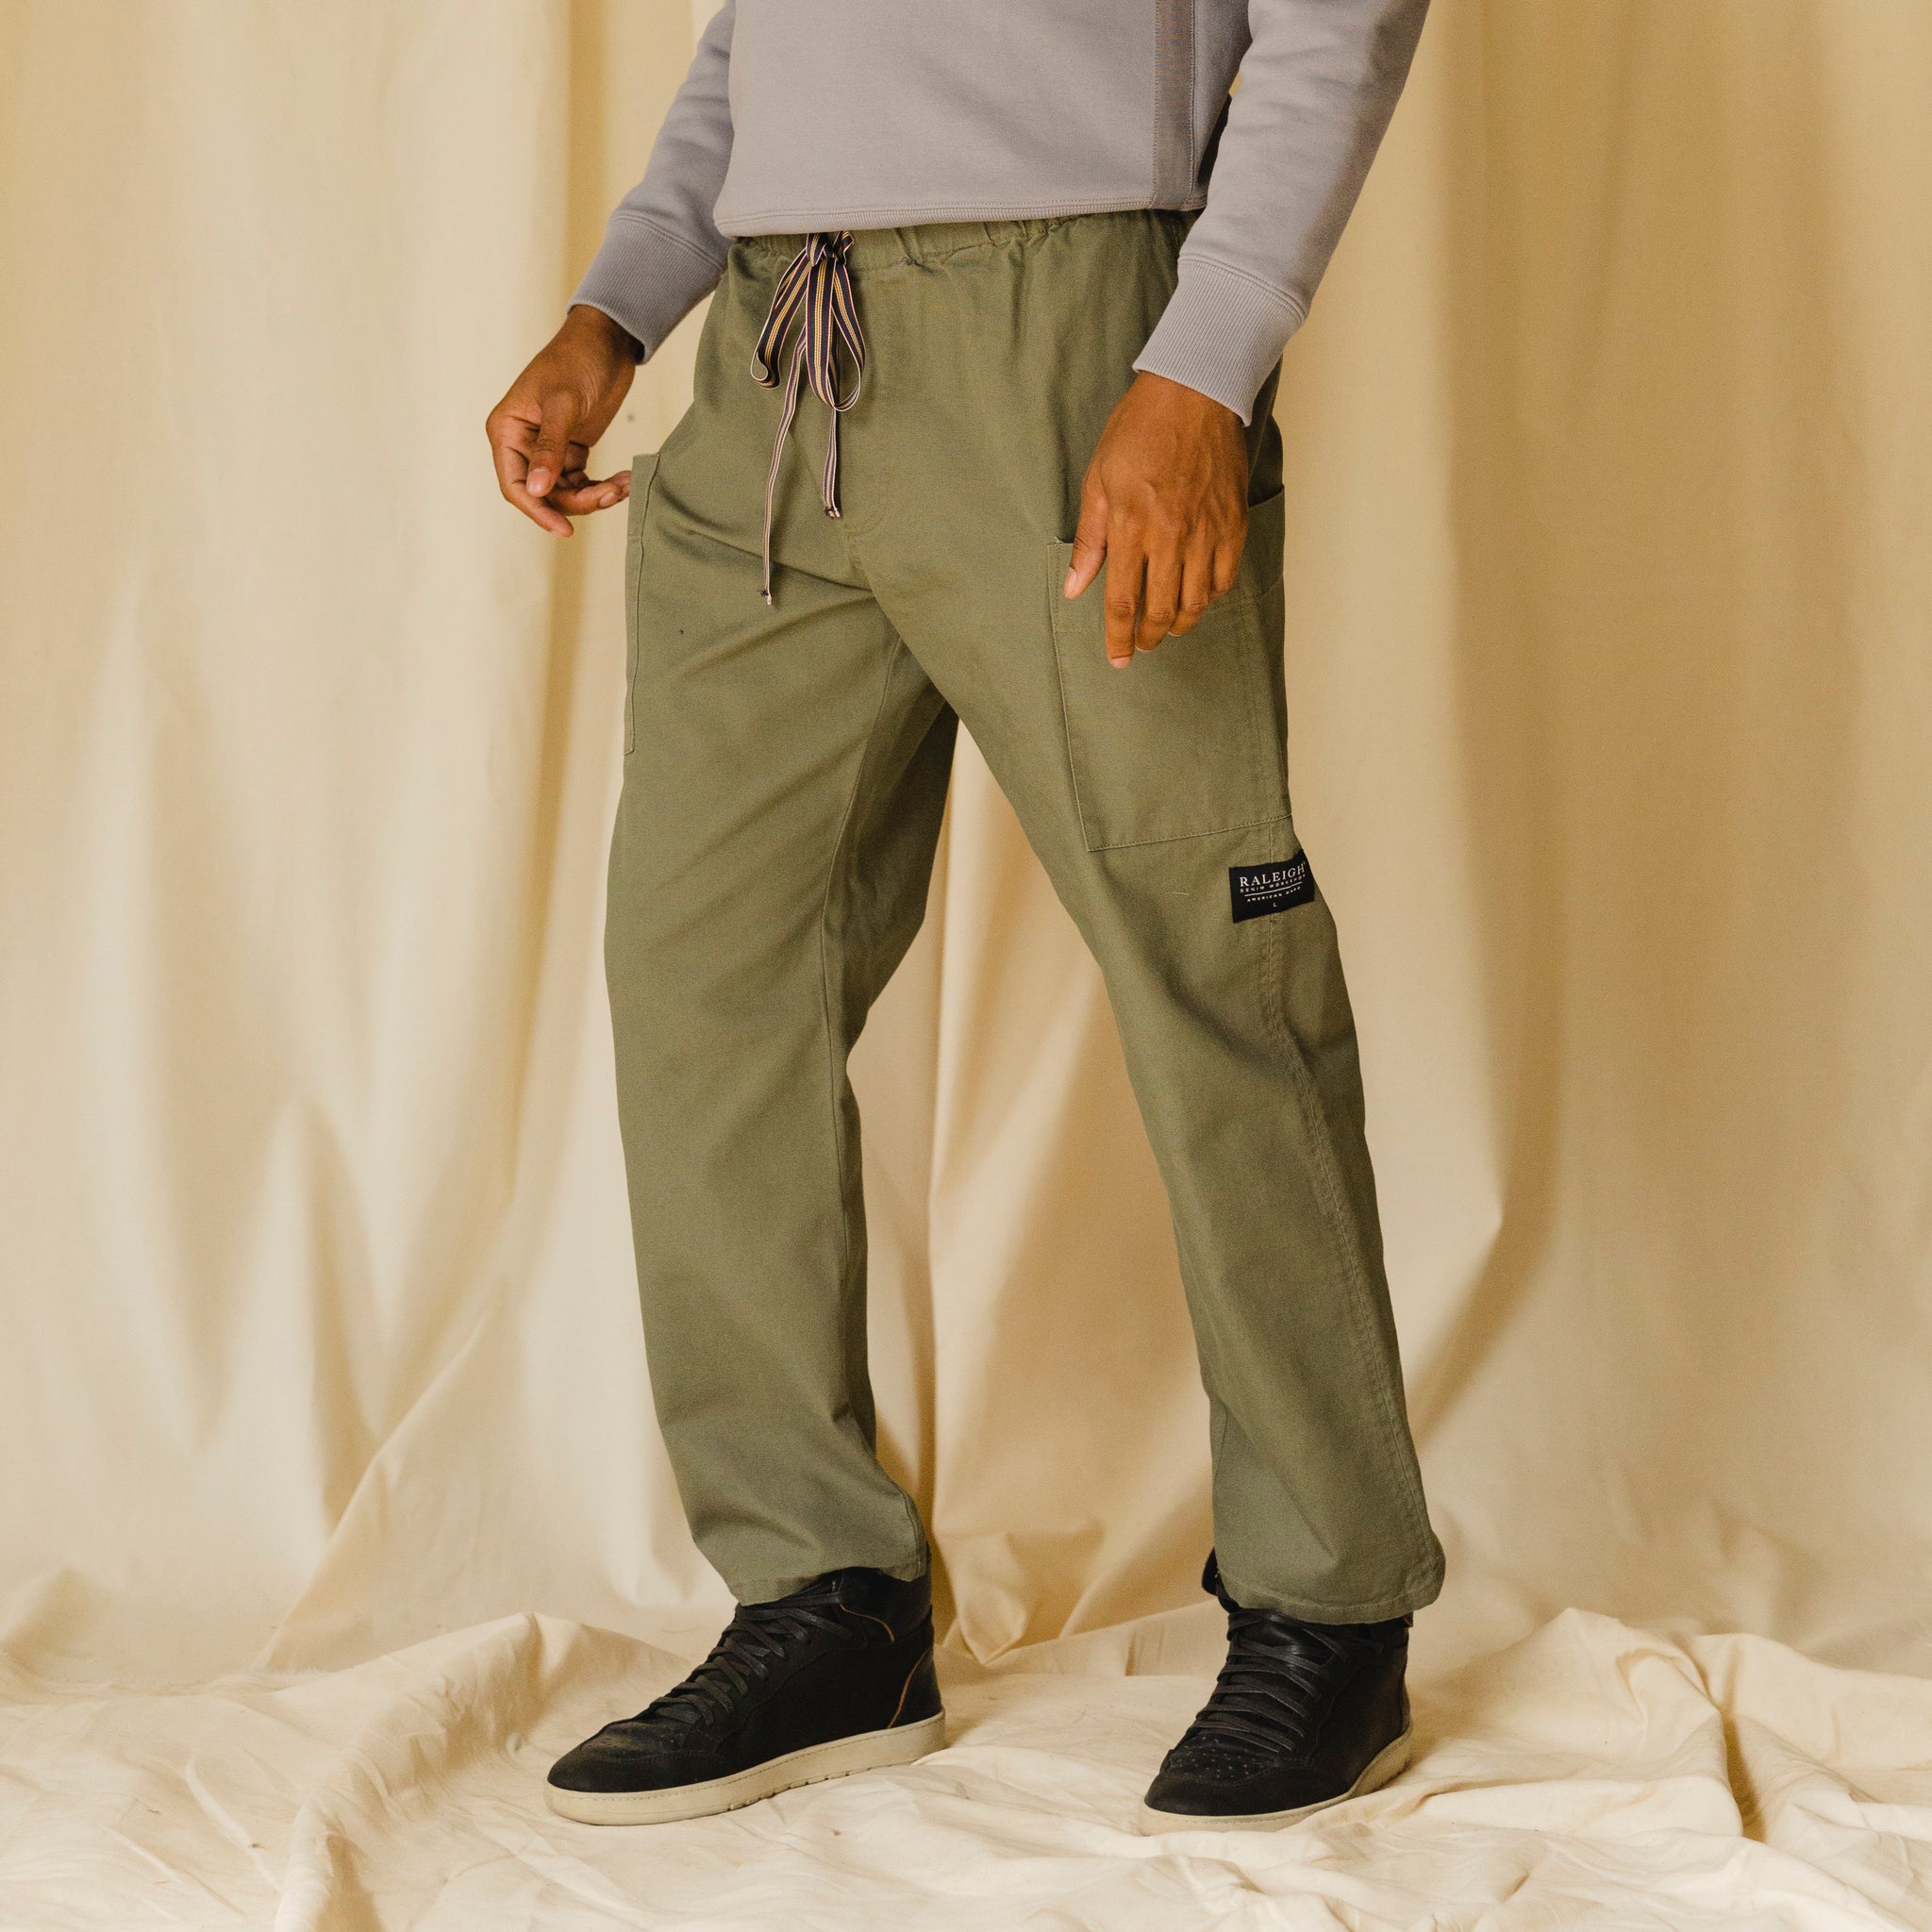 Raleigh Workshop Men's Drawstring Pant in Olive Canvas | Size Small | 100% Cotton